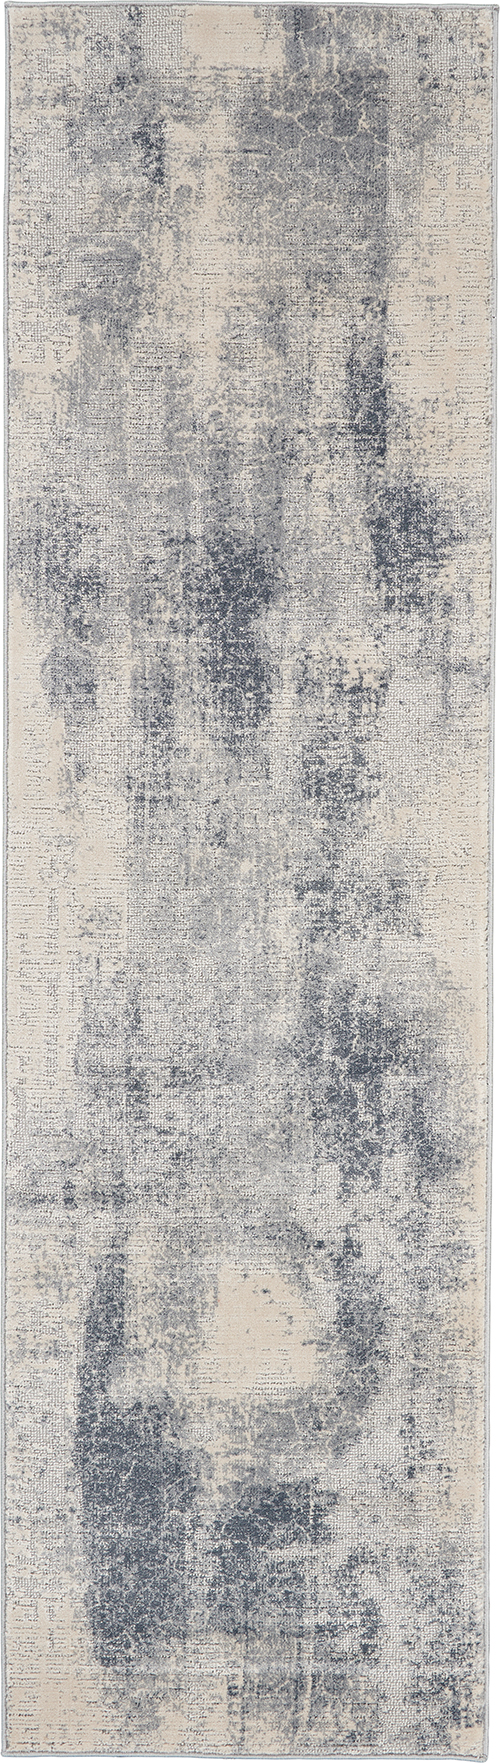 Nourison Rugs - Rustic Textures Runner RUS02 Rug in Blue / Ivory - 2.3m x 0.66m